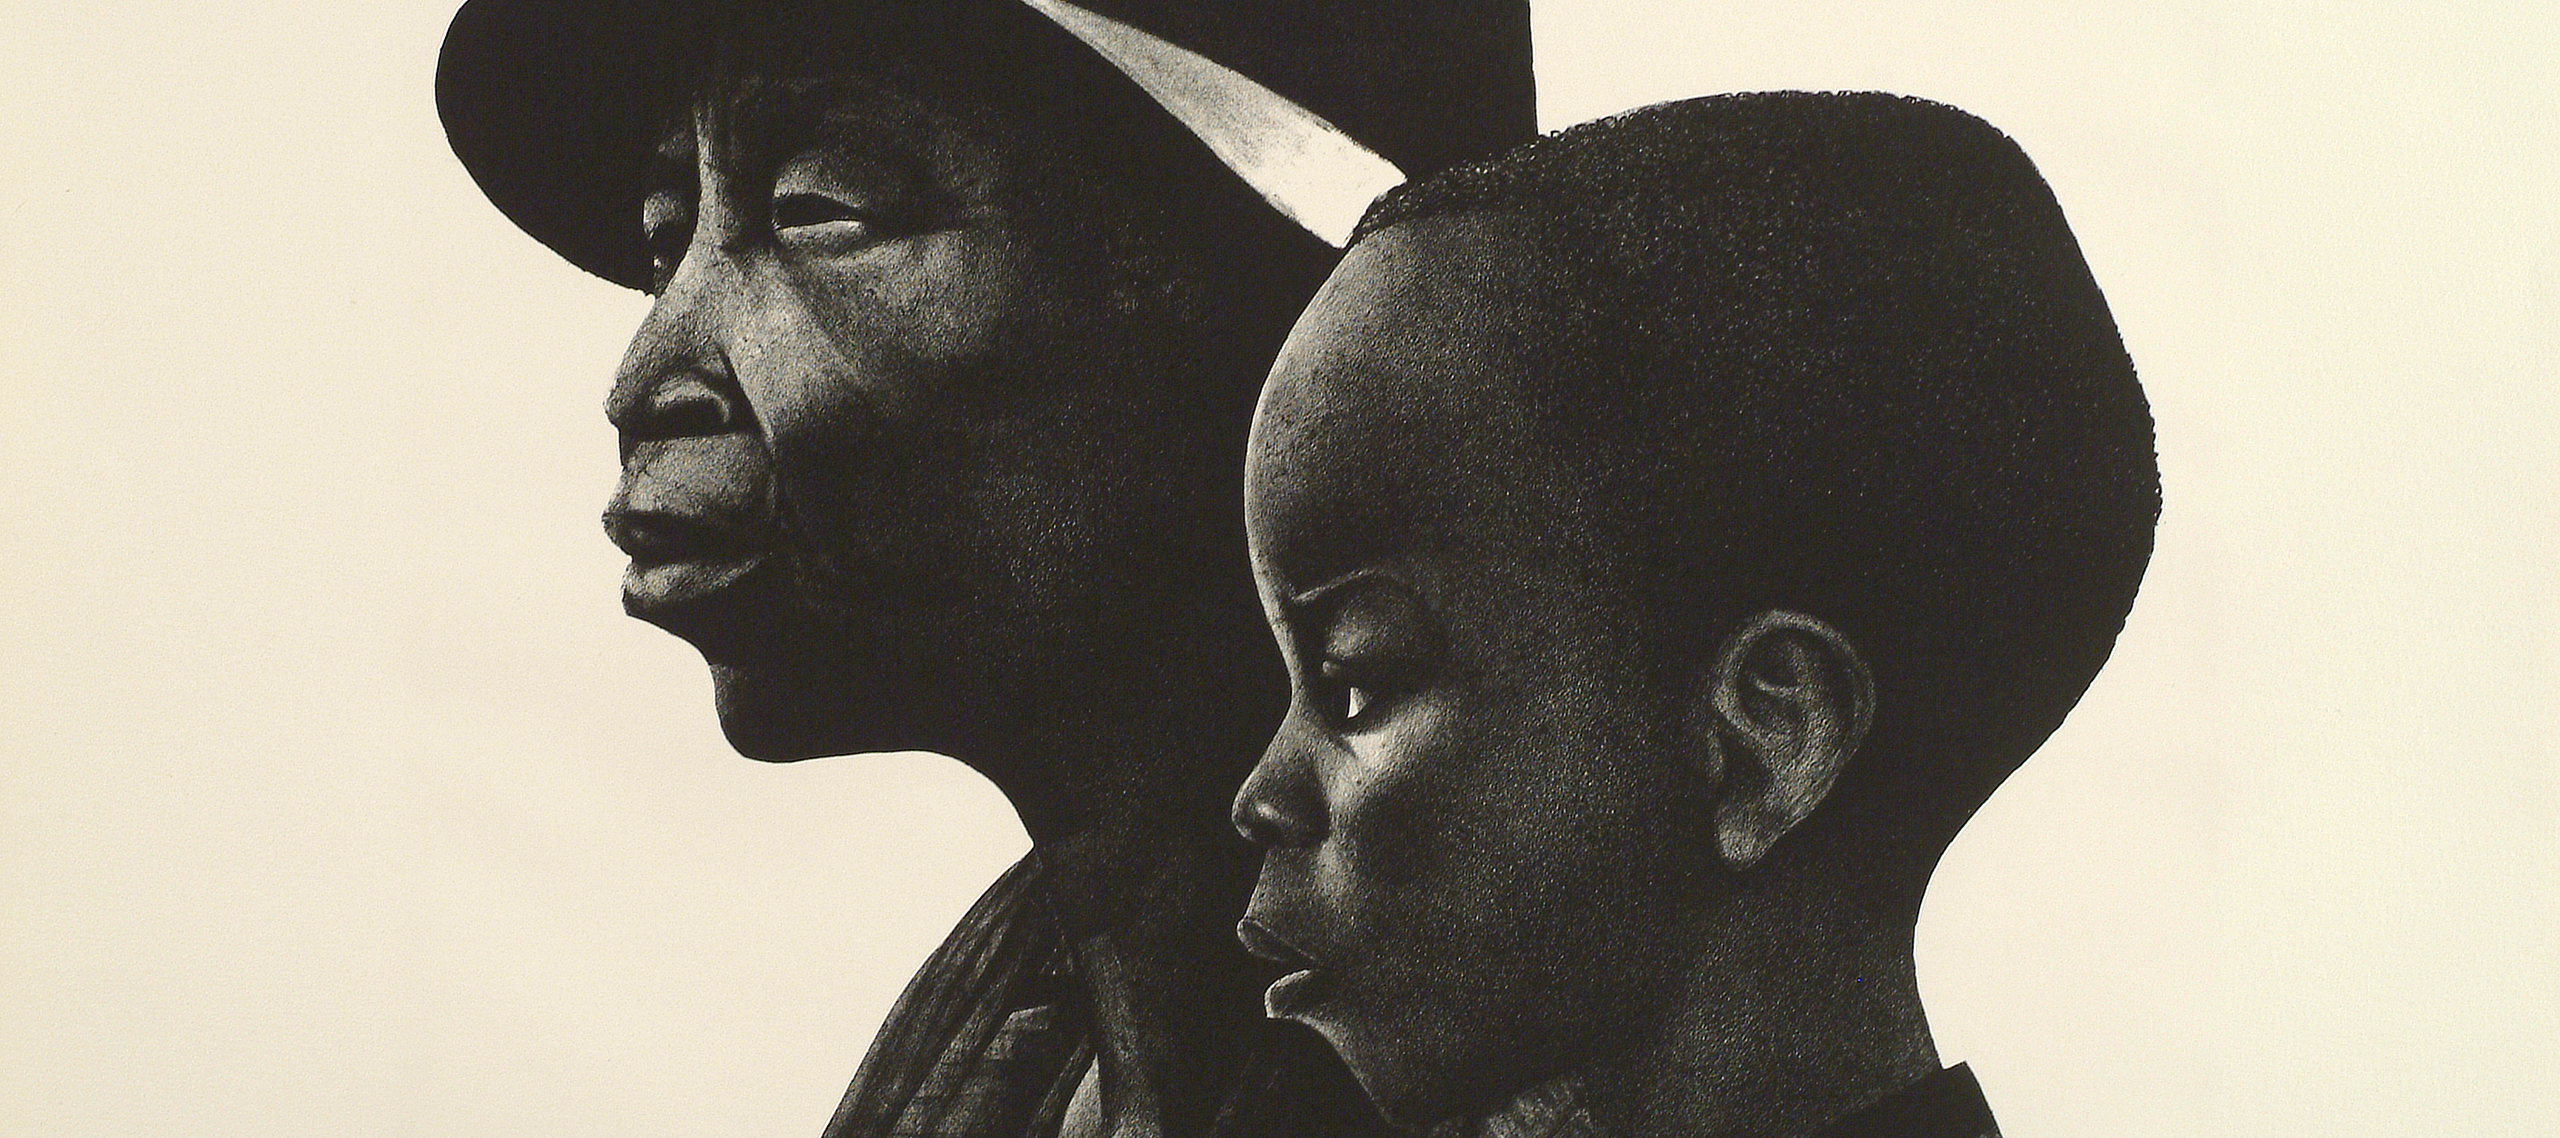 A black-and-white print of two dark-skinned individuals in profile, facing left. The person in the background is an older adult wearing a brimmed hat, and in the foreground and slightly to the right is a young child with coarse hair cut close to the head.